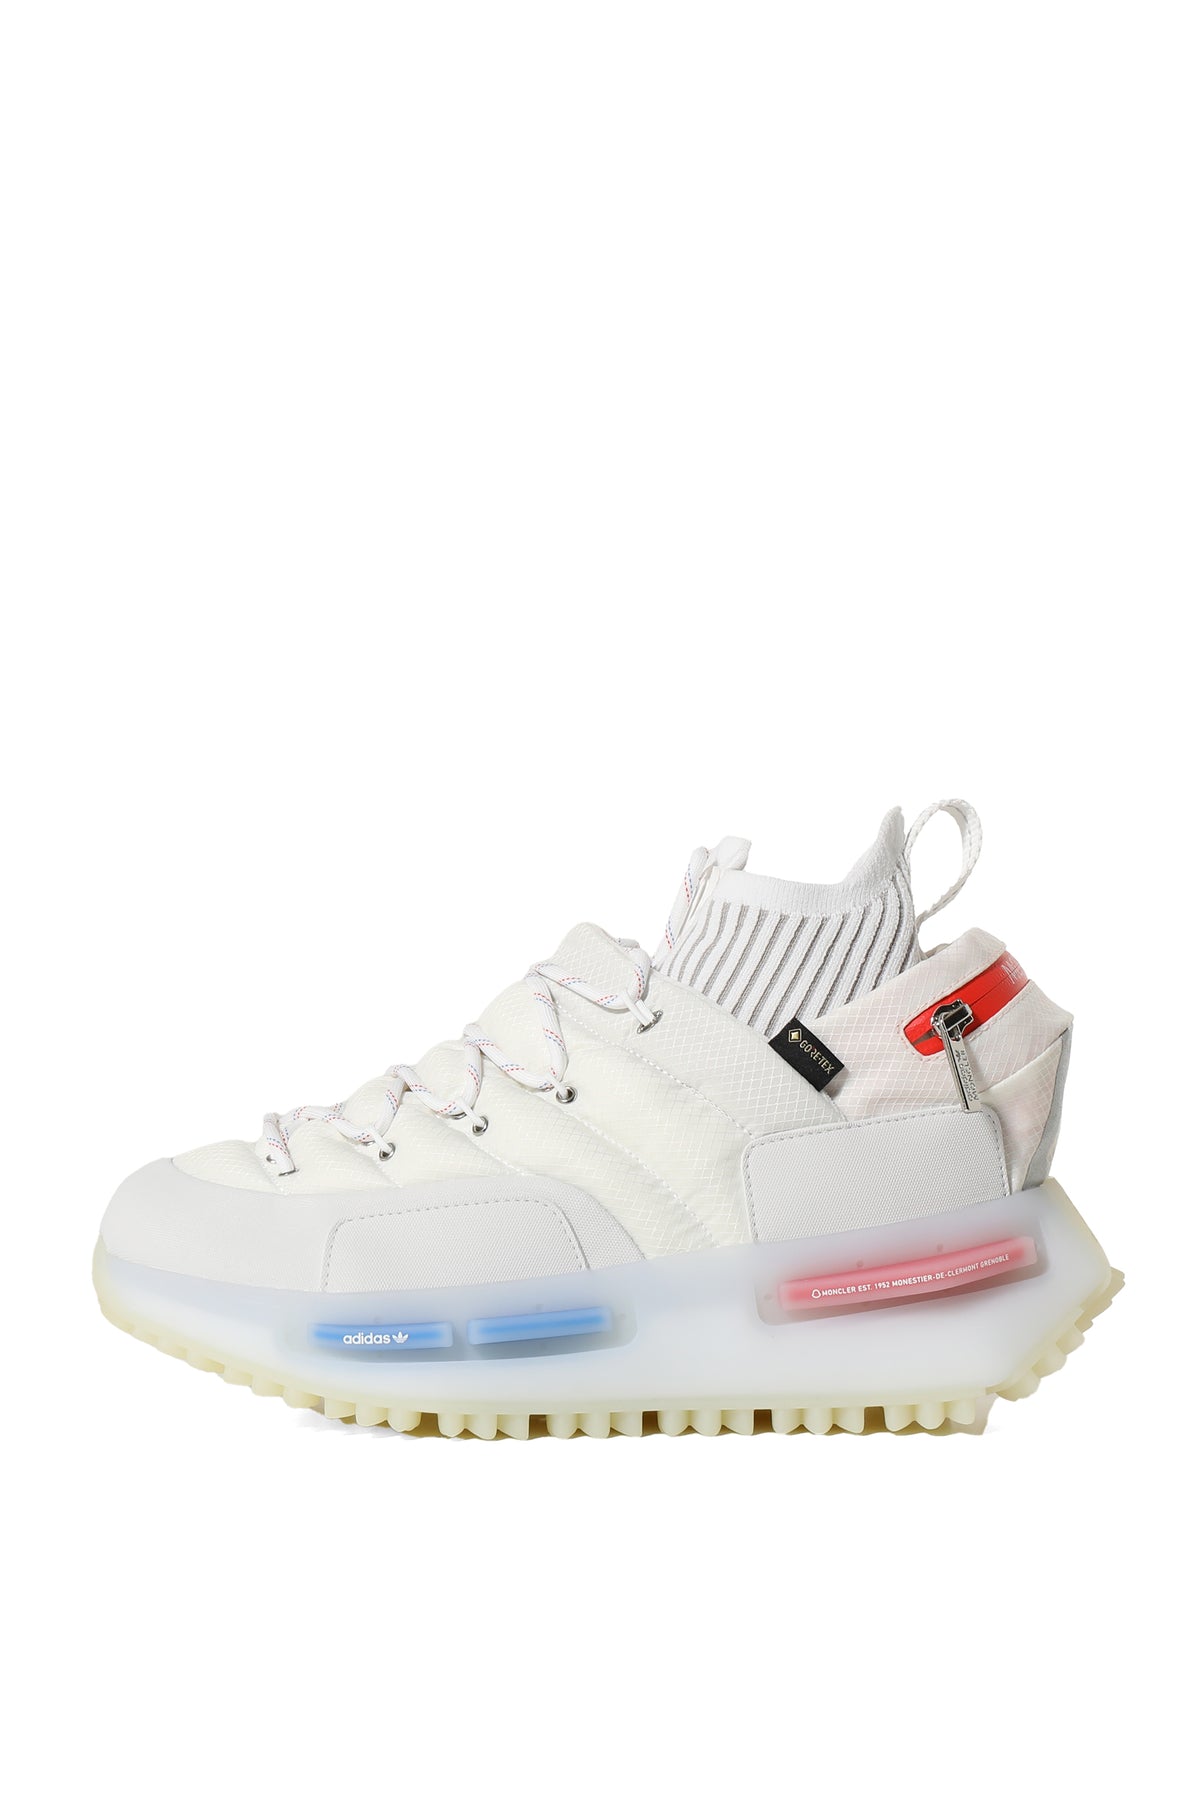 MONCLER NMD RUNNER HIGH TOP SNEAKERS / WHT